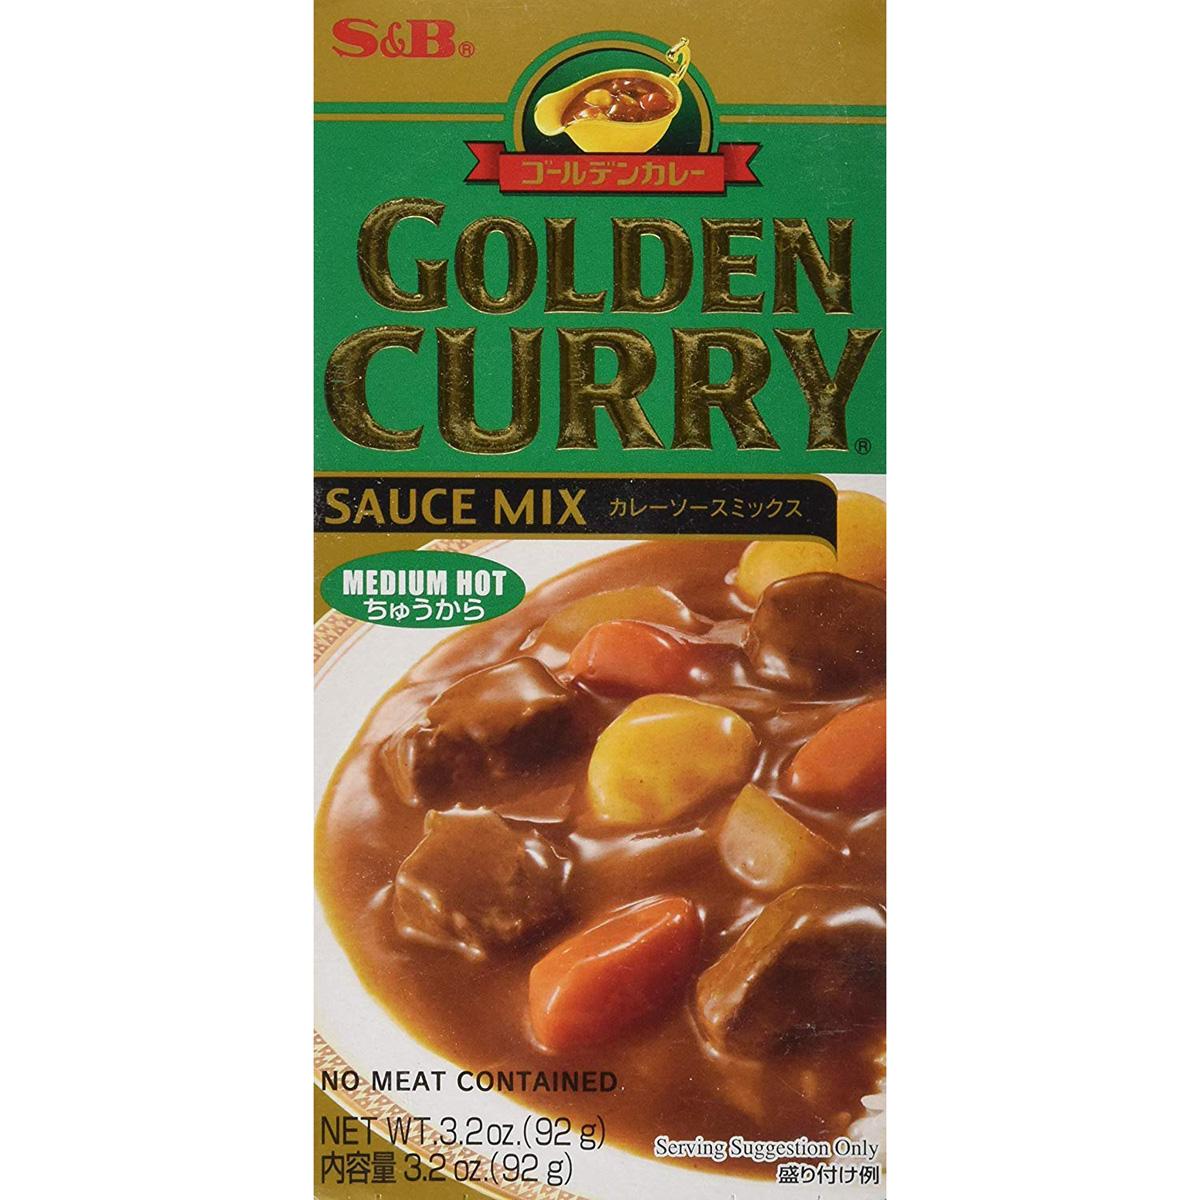 S&B Golden Curry Sauce Mix for $2.56 Shipped